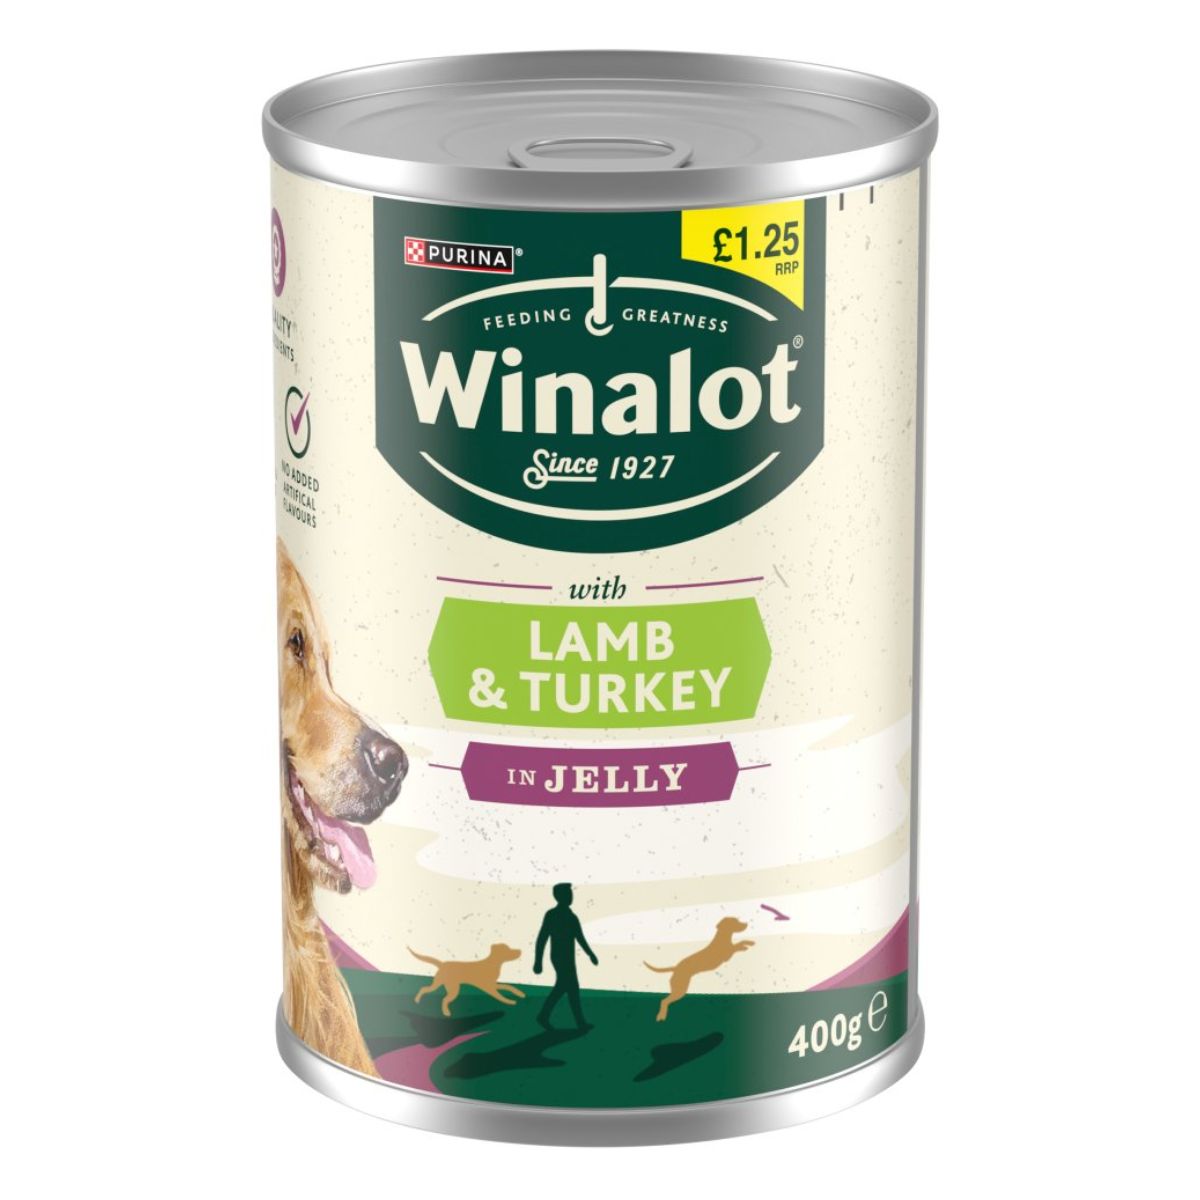 Purina - Winalot with Lamb & Turkey in Jelly - 400g canned dog food.